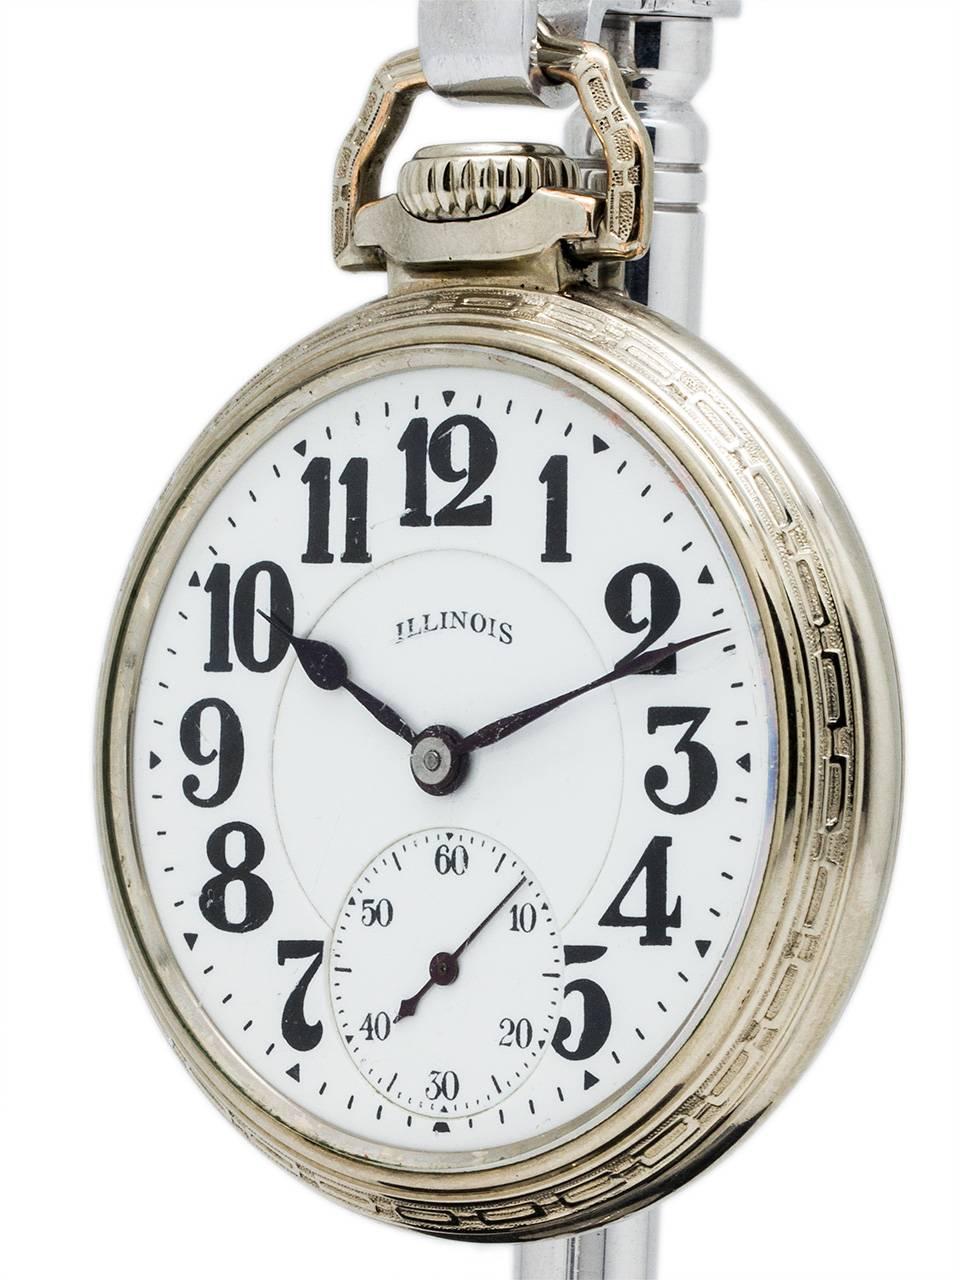 Beautiful example Illinois 16-S Bunn Special 60 hour base metal pocket watch, circa 1929. Gorgeous double sunk white enamel dial with bold Arabic numeral markers, subsidiary seconds at 6 o'clock and blued steel spade hands. Excellent condition,